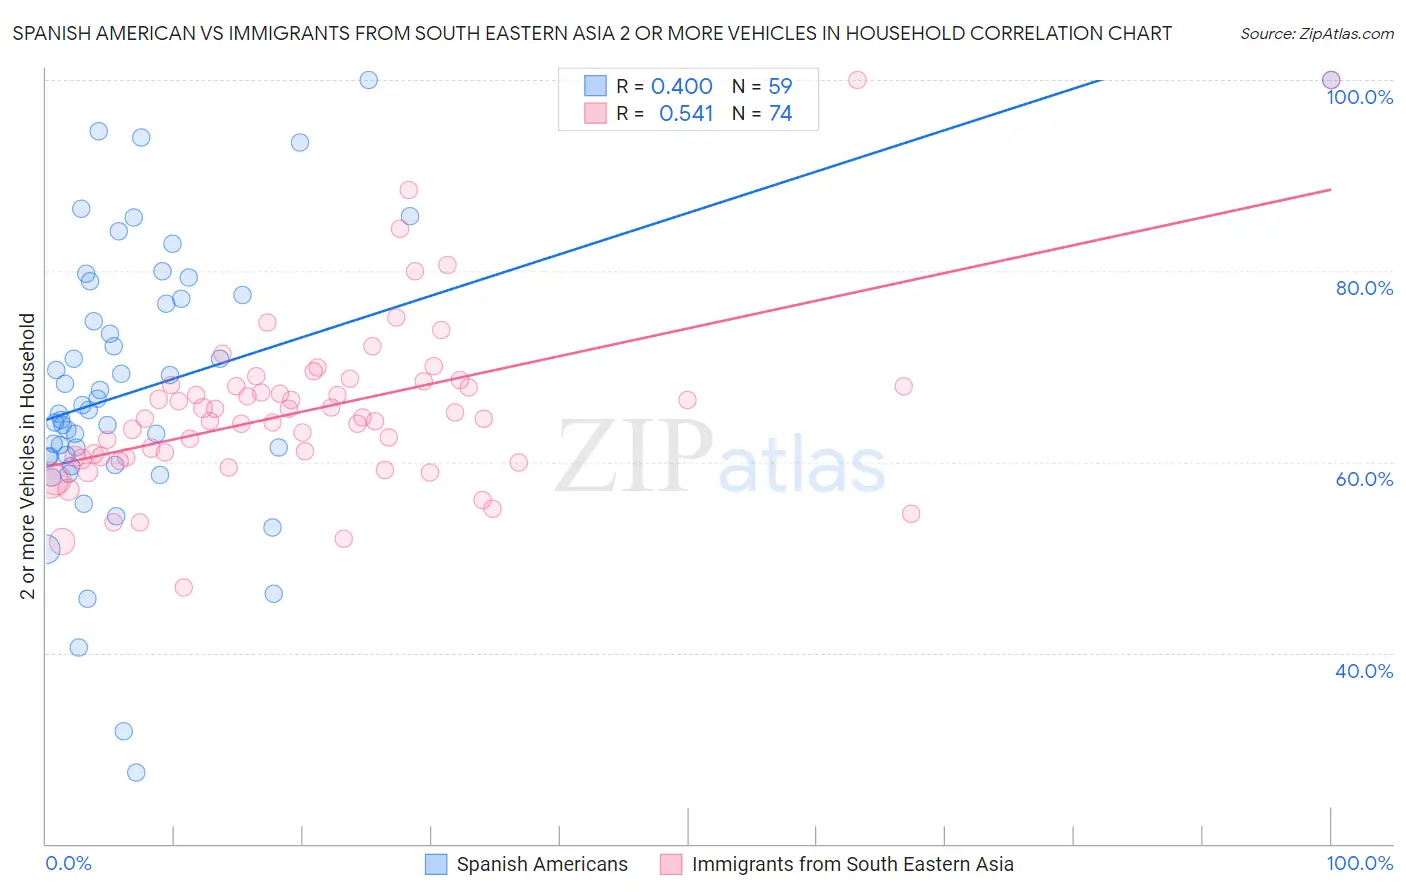 Spanish American vs Immigrants from South Eastern Asia 2 or more Vehicles in Household